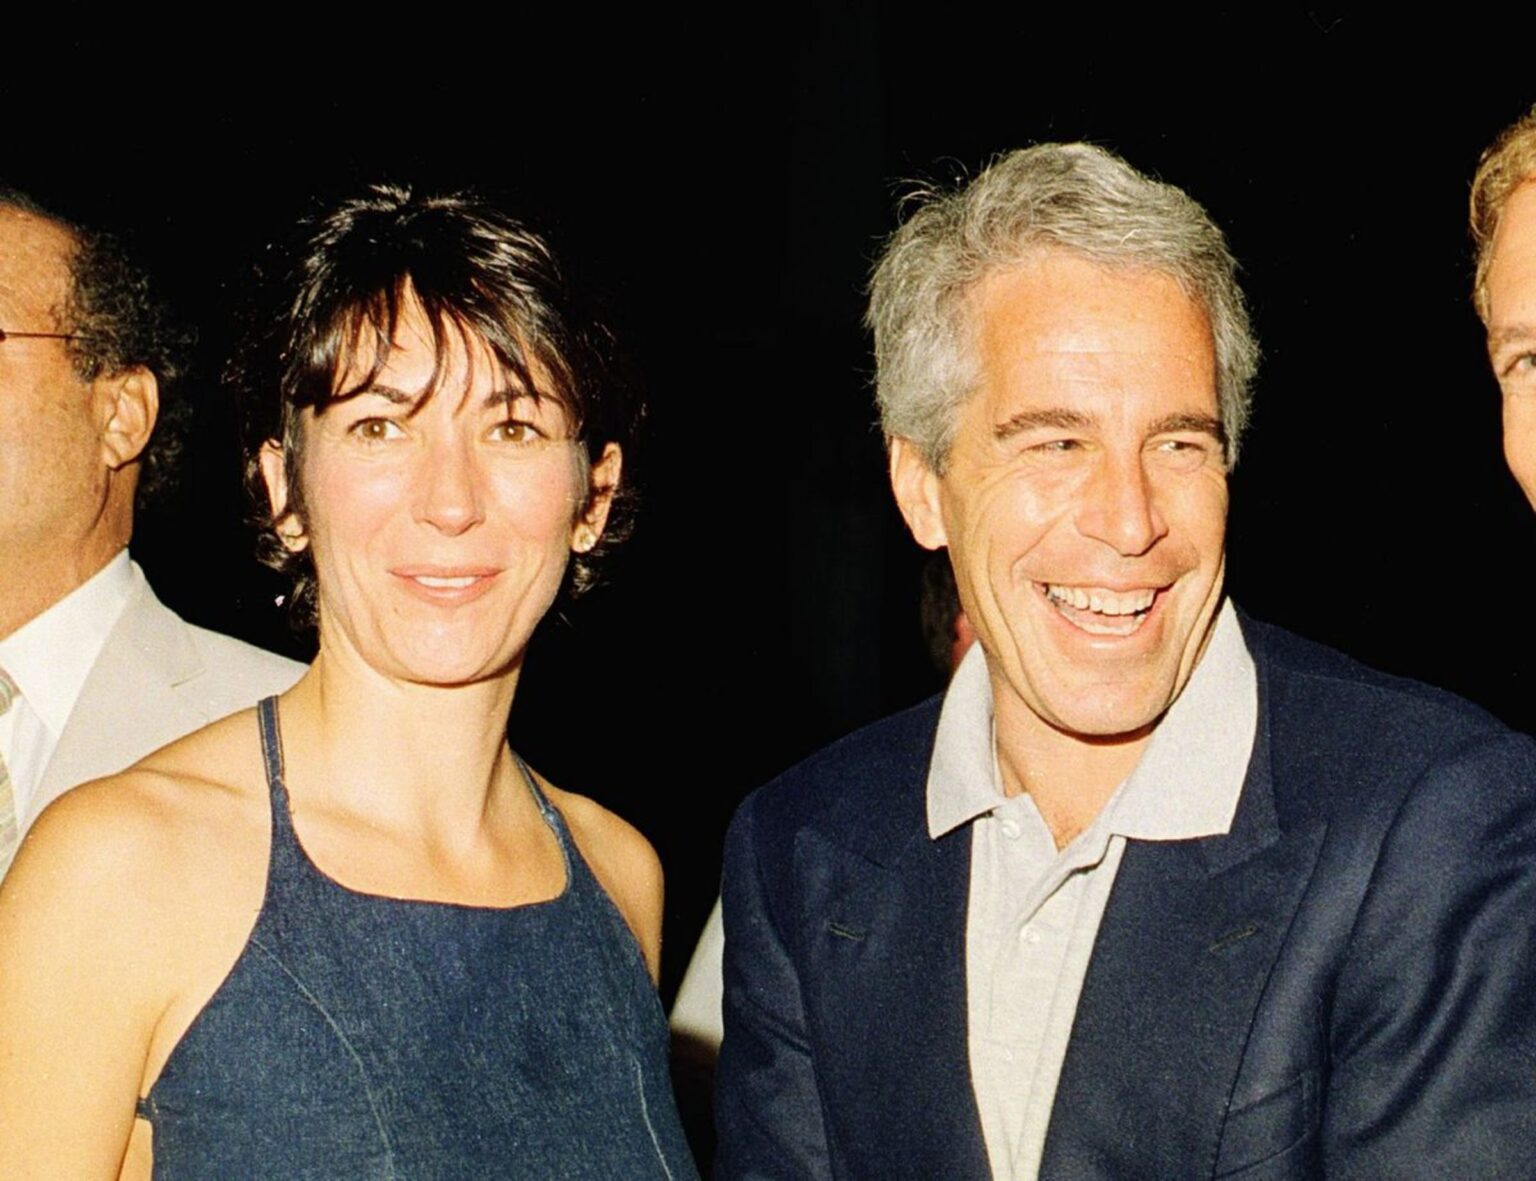 Ghislaine Maxwell went to great lengths to separate herself from Jeffrey Epstein after being convicted as a sex offender.